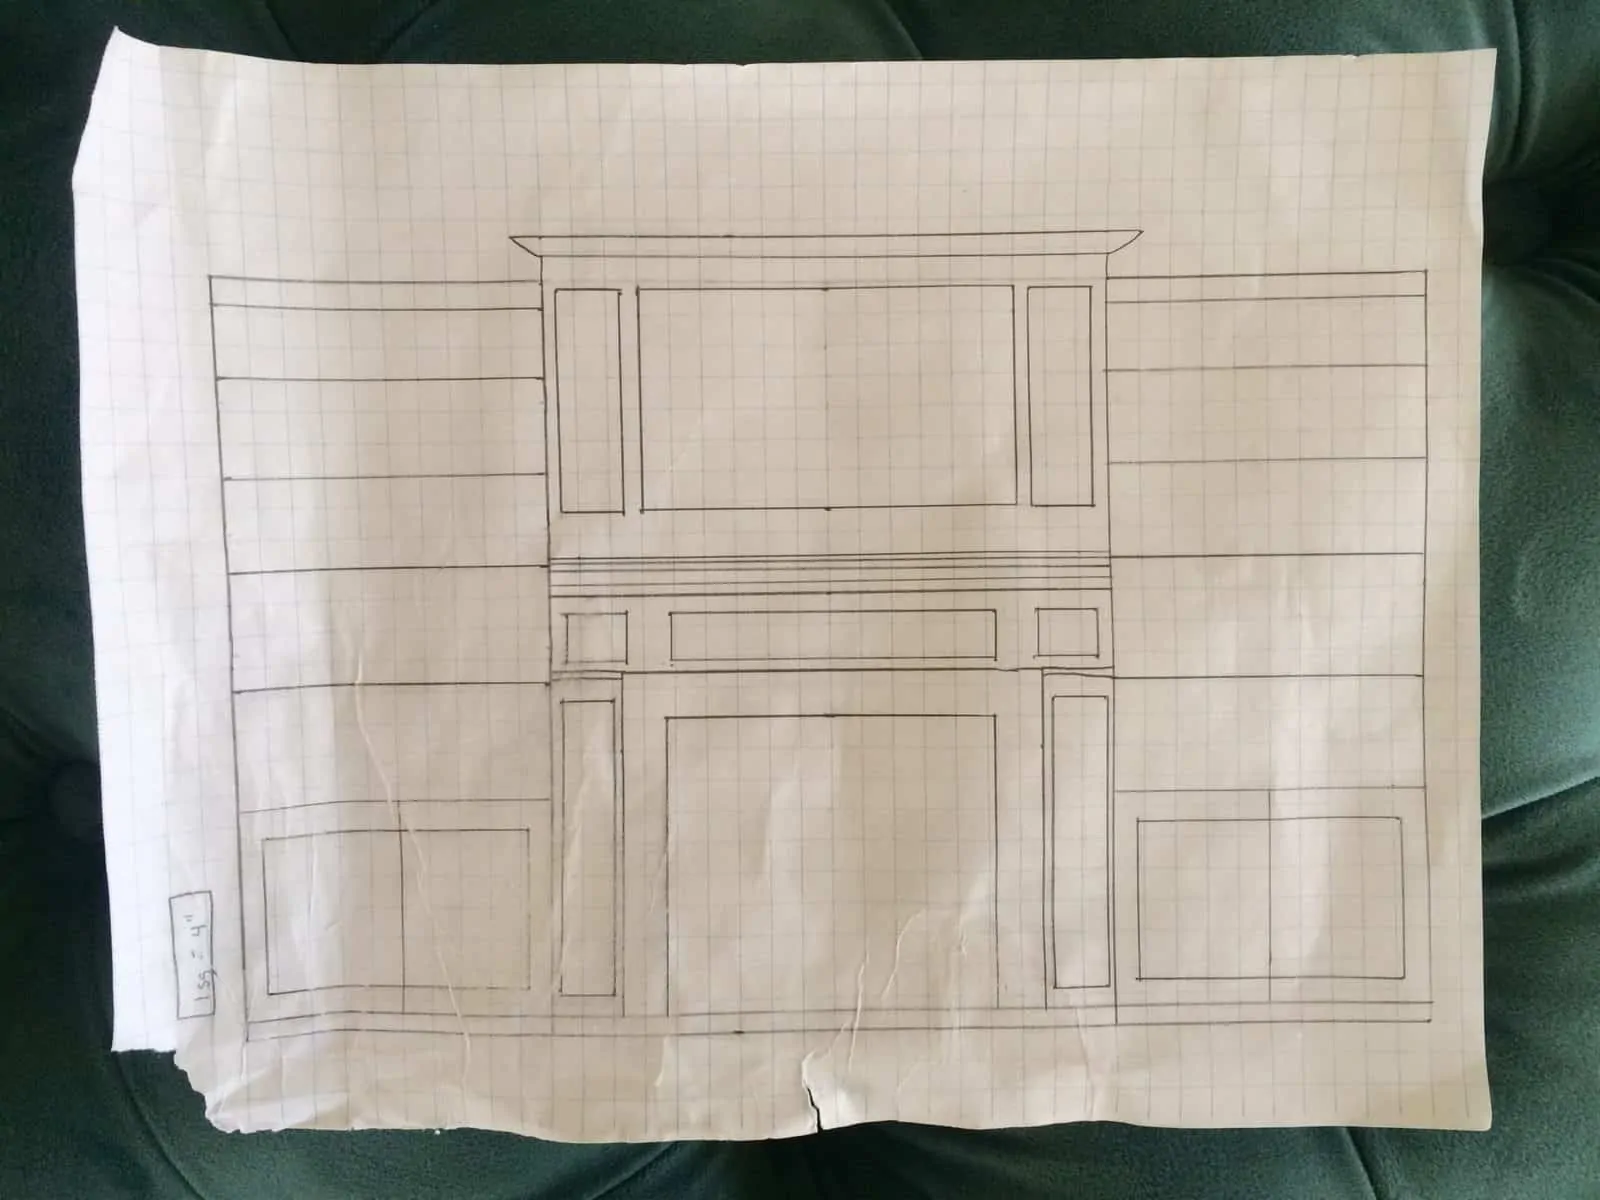 My beautiful sketch of what the whole thing will look like someday! All that is left is the portion over the fireplace to frame out the tv.